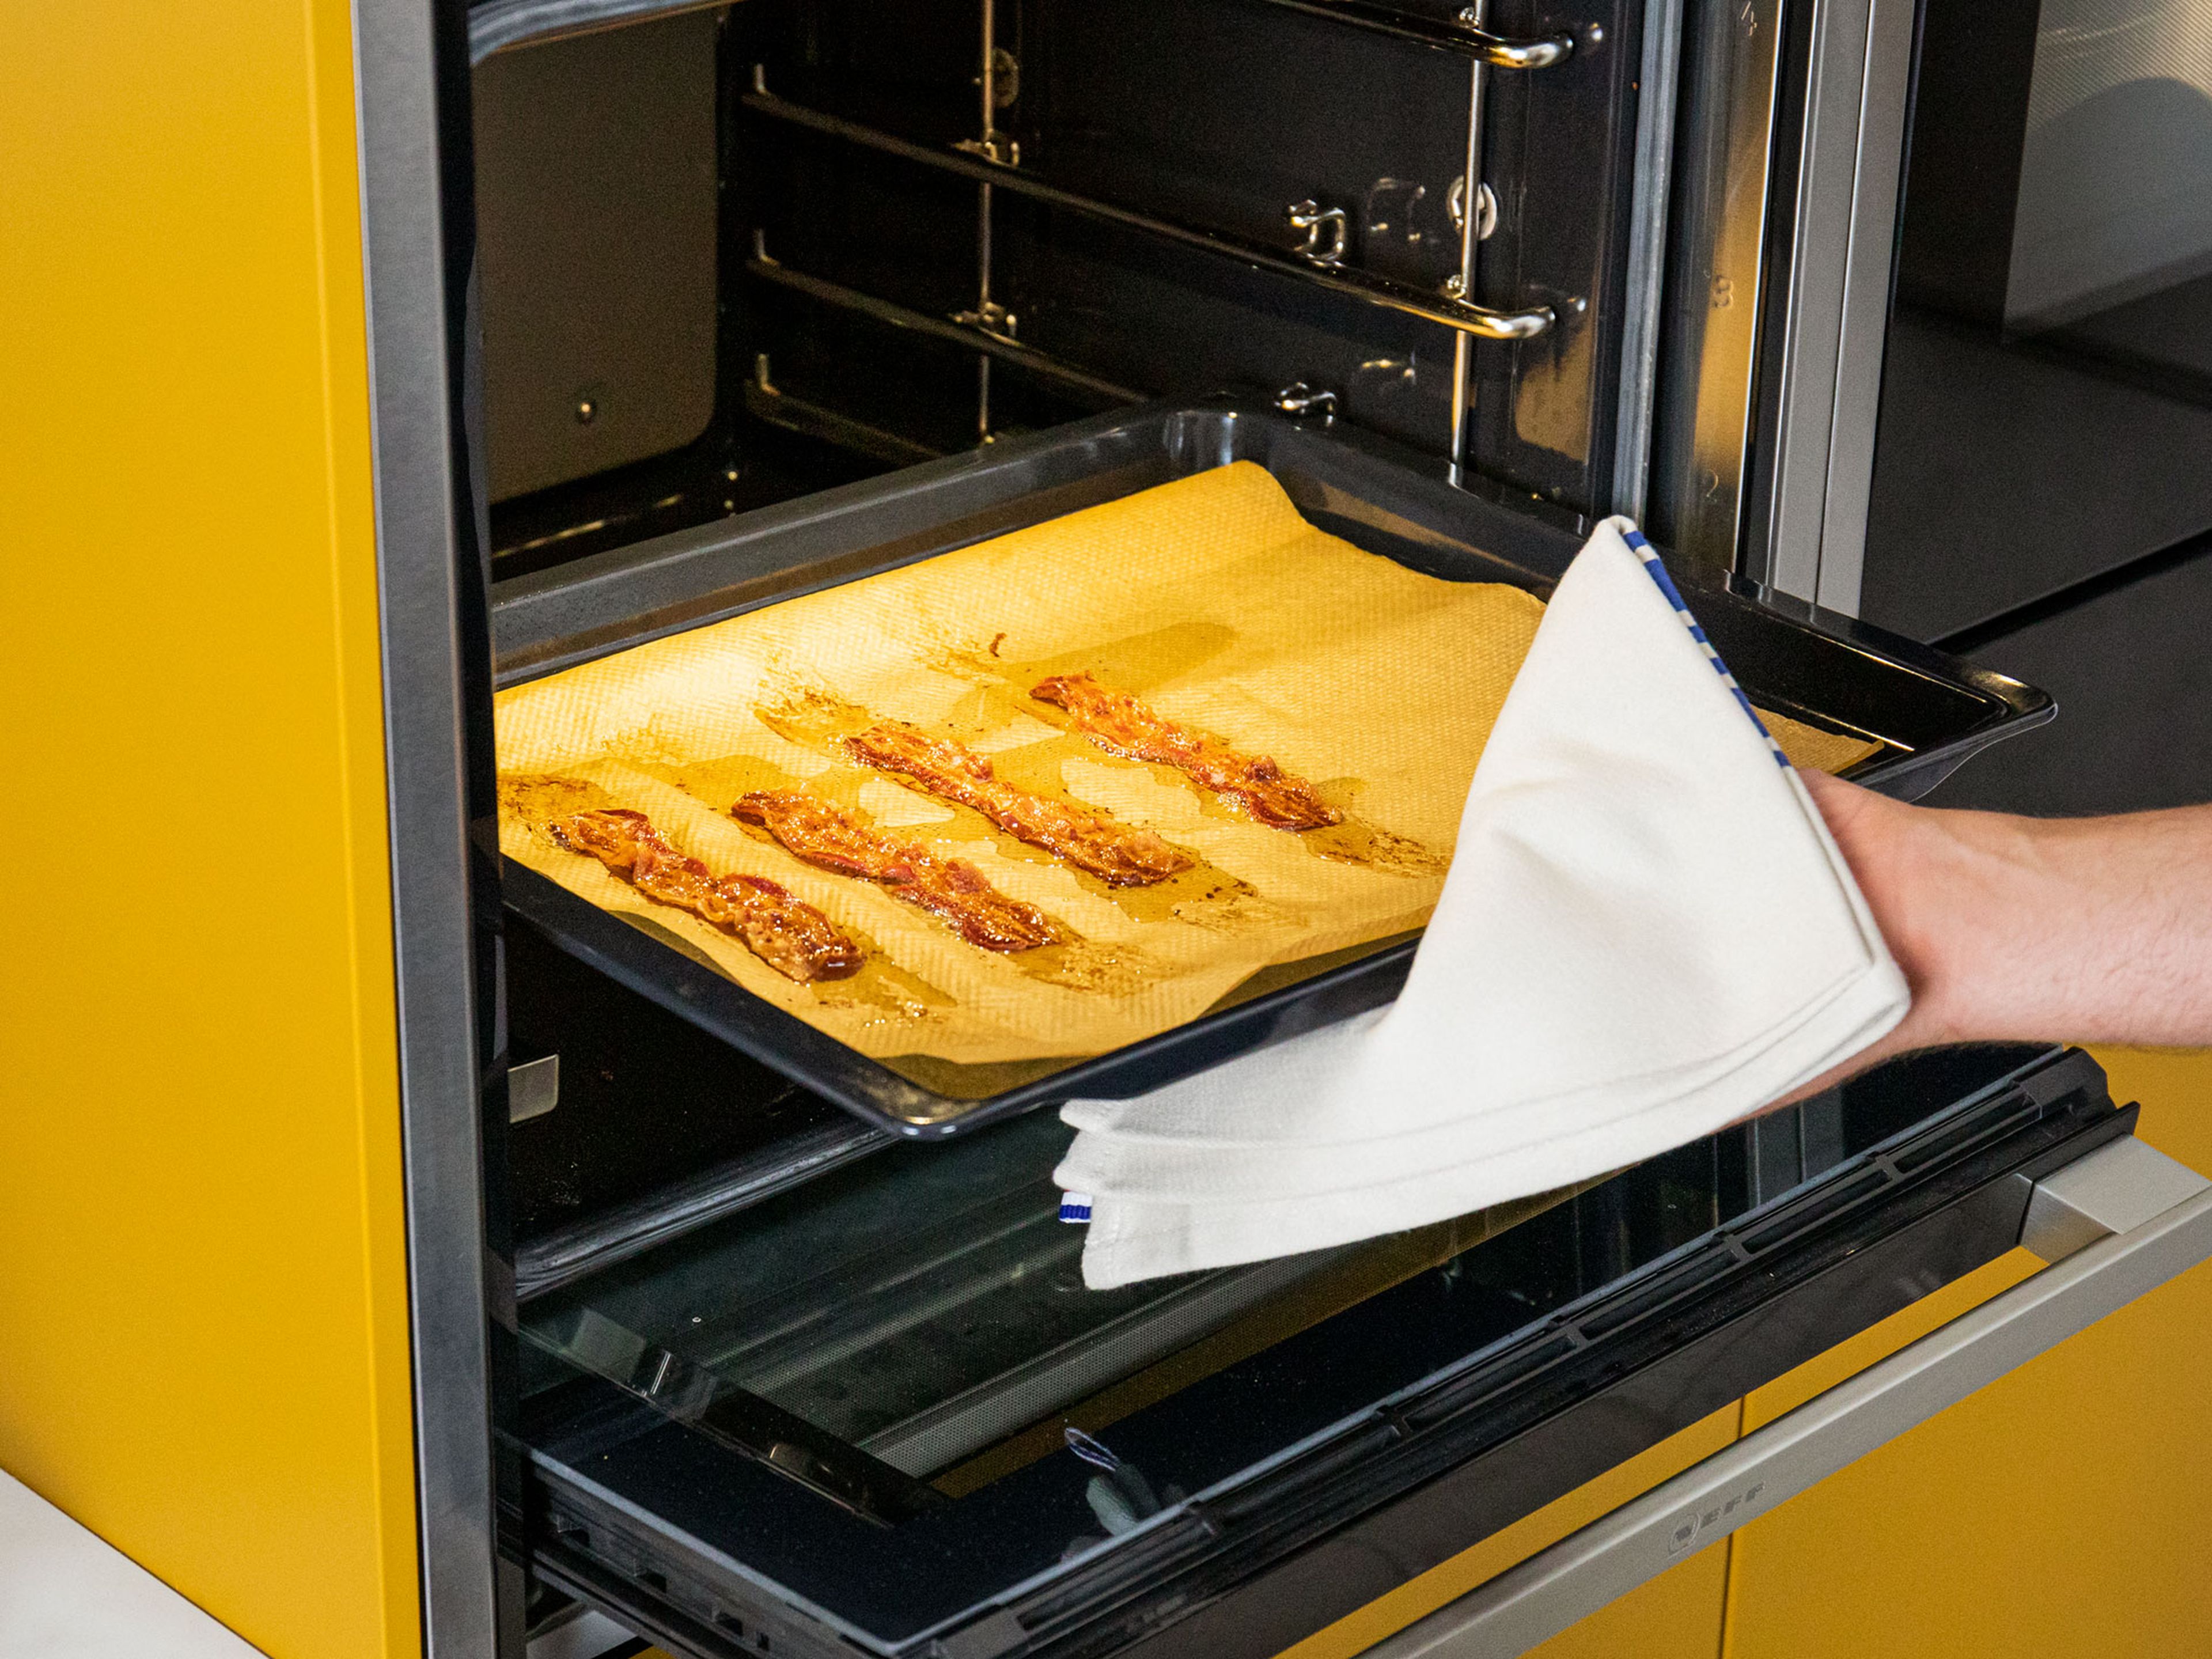 Preheat oven to 220°C/425°F. Line a baking sheet with parchment paper and lay the bacon slices on it, making sure they don’t overlap. Bake for approx. 8 – 12 min., turning halfway through. Transfer crispy bacon slices to a paper towel-lined plate to drain.